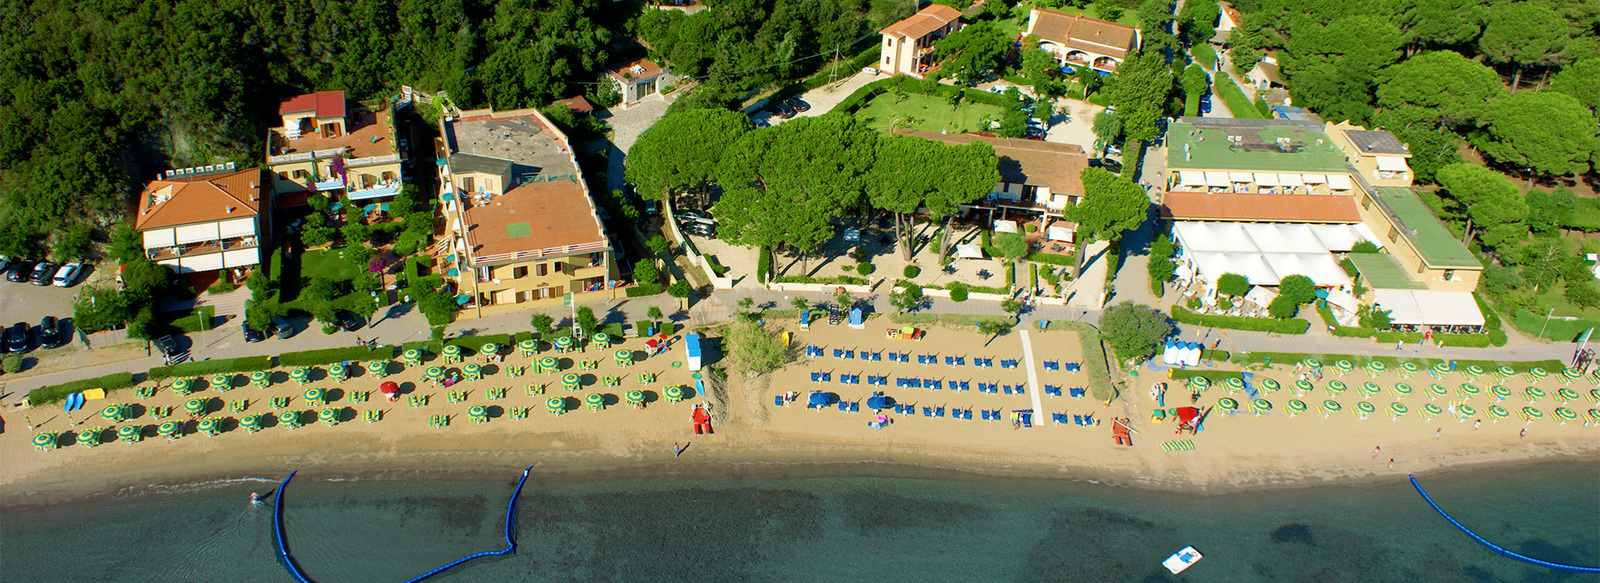 Residence fronte mare per famiglie